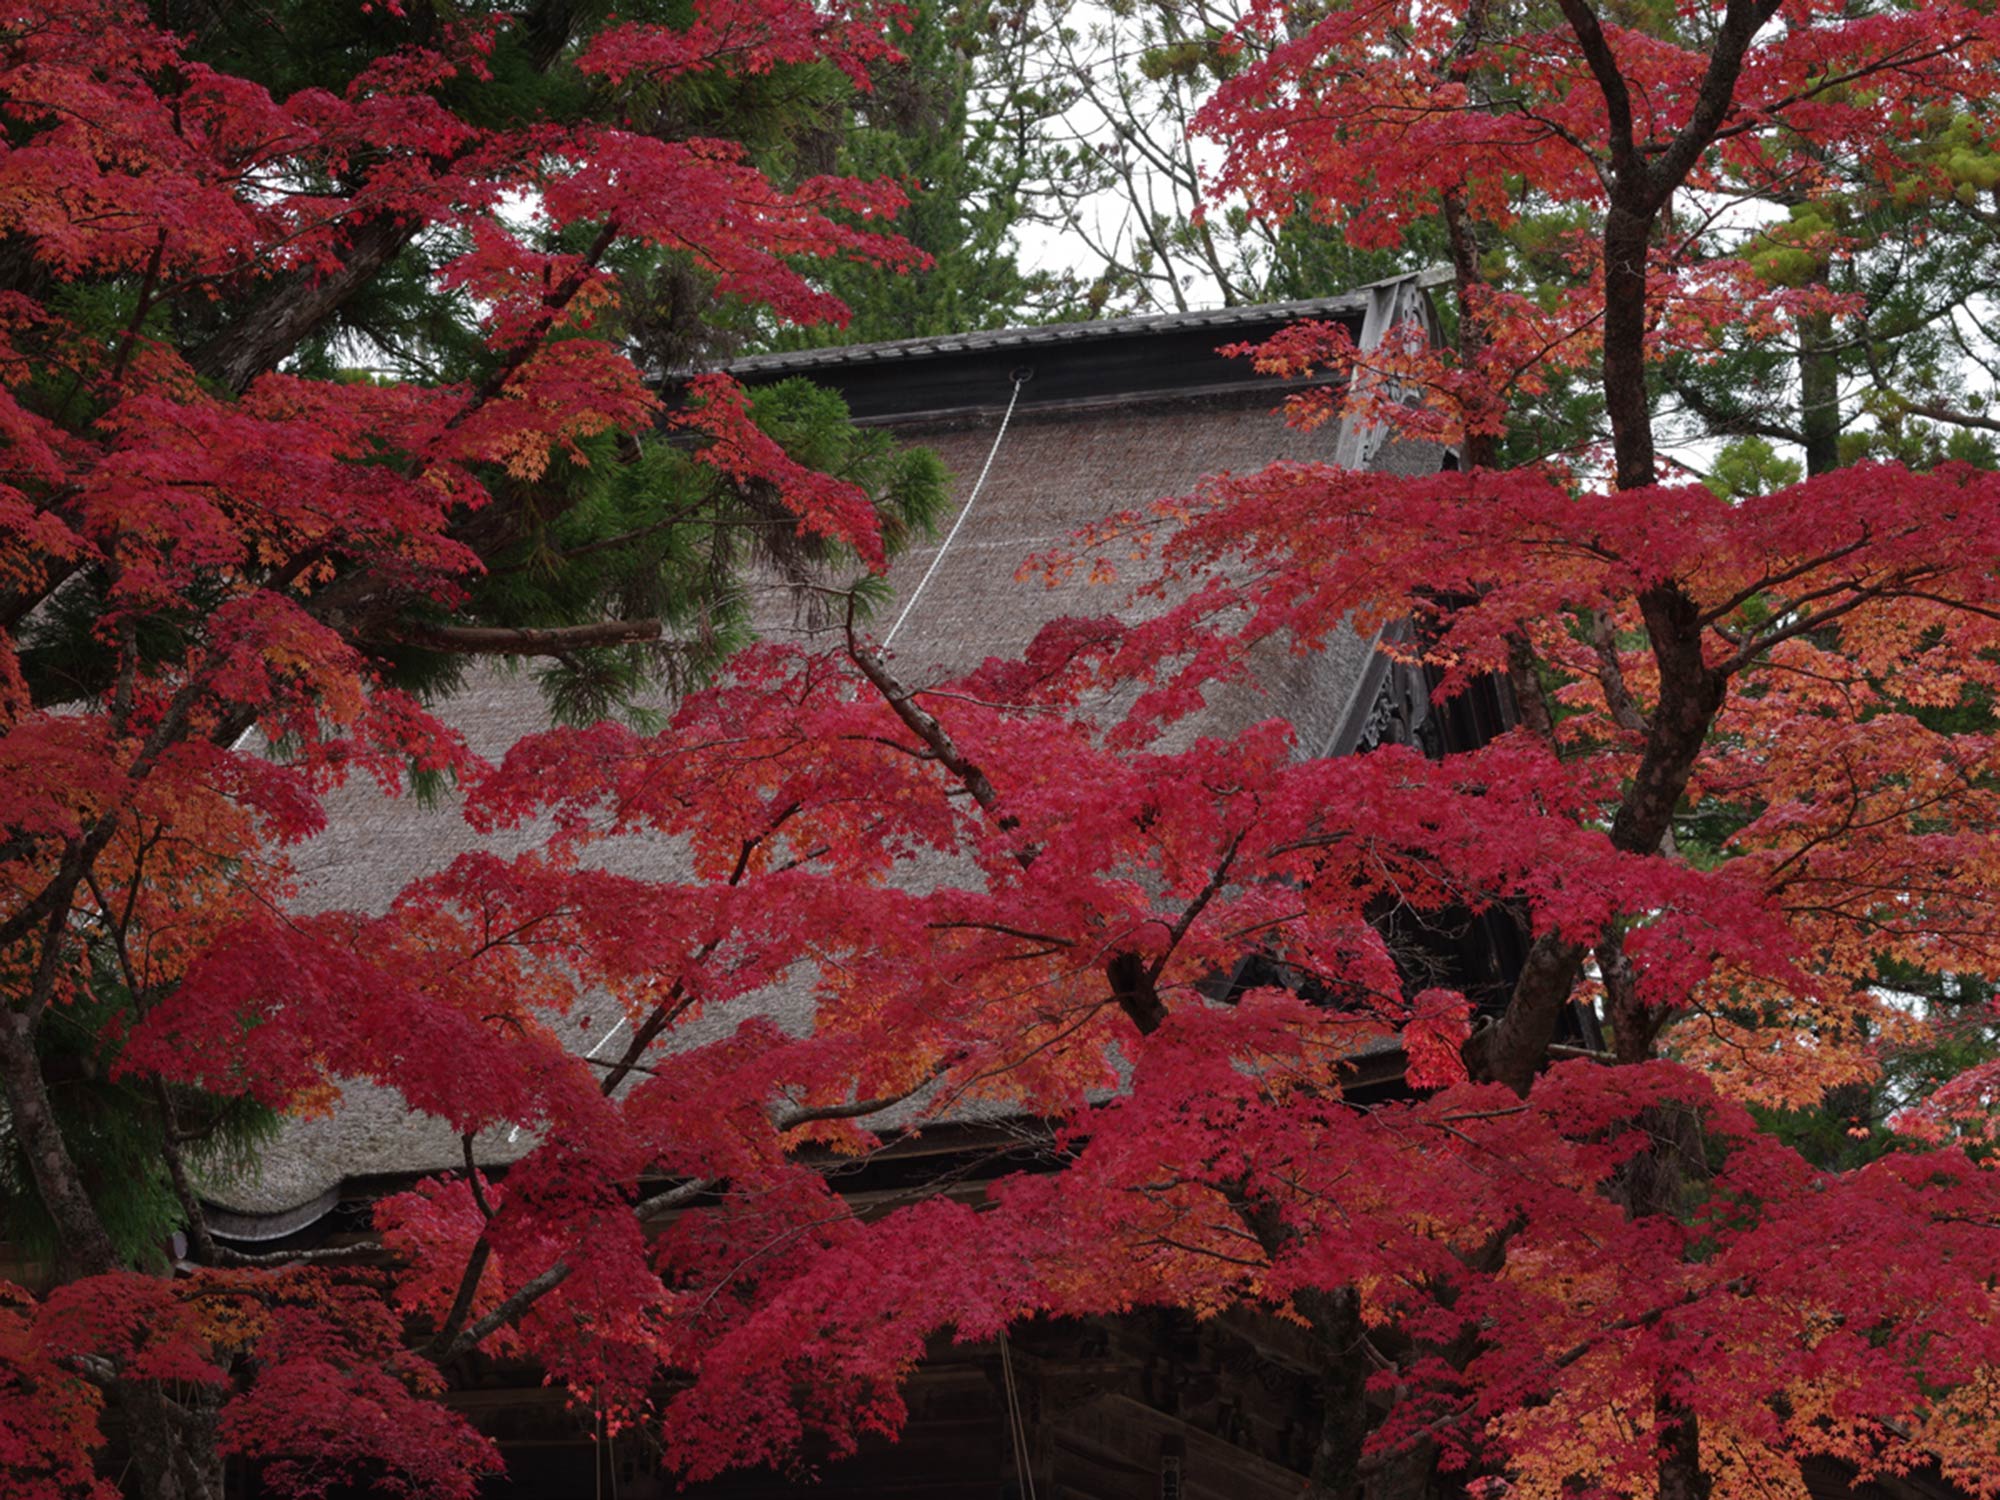 The esoteric buddhism temple in Koyasan is dressed in brocade red leaves　©Motonori Takedaの写真